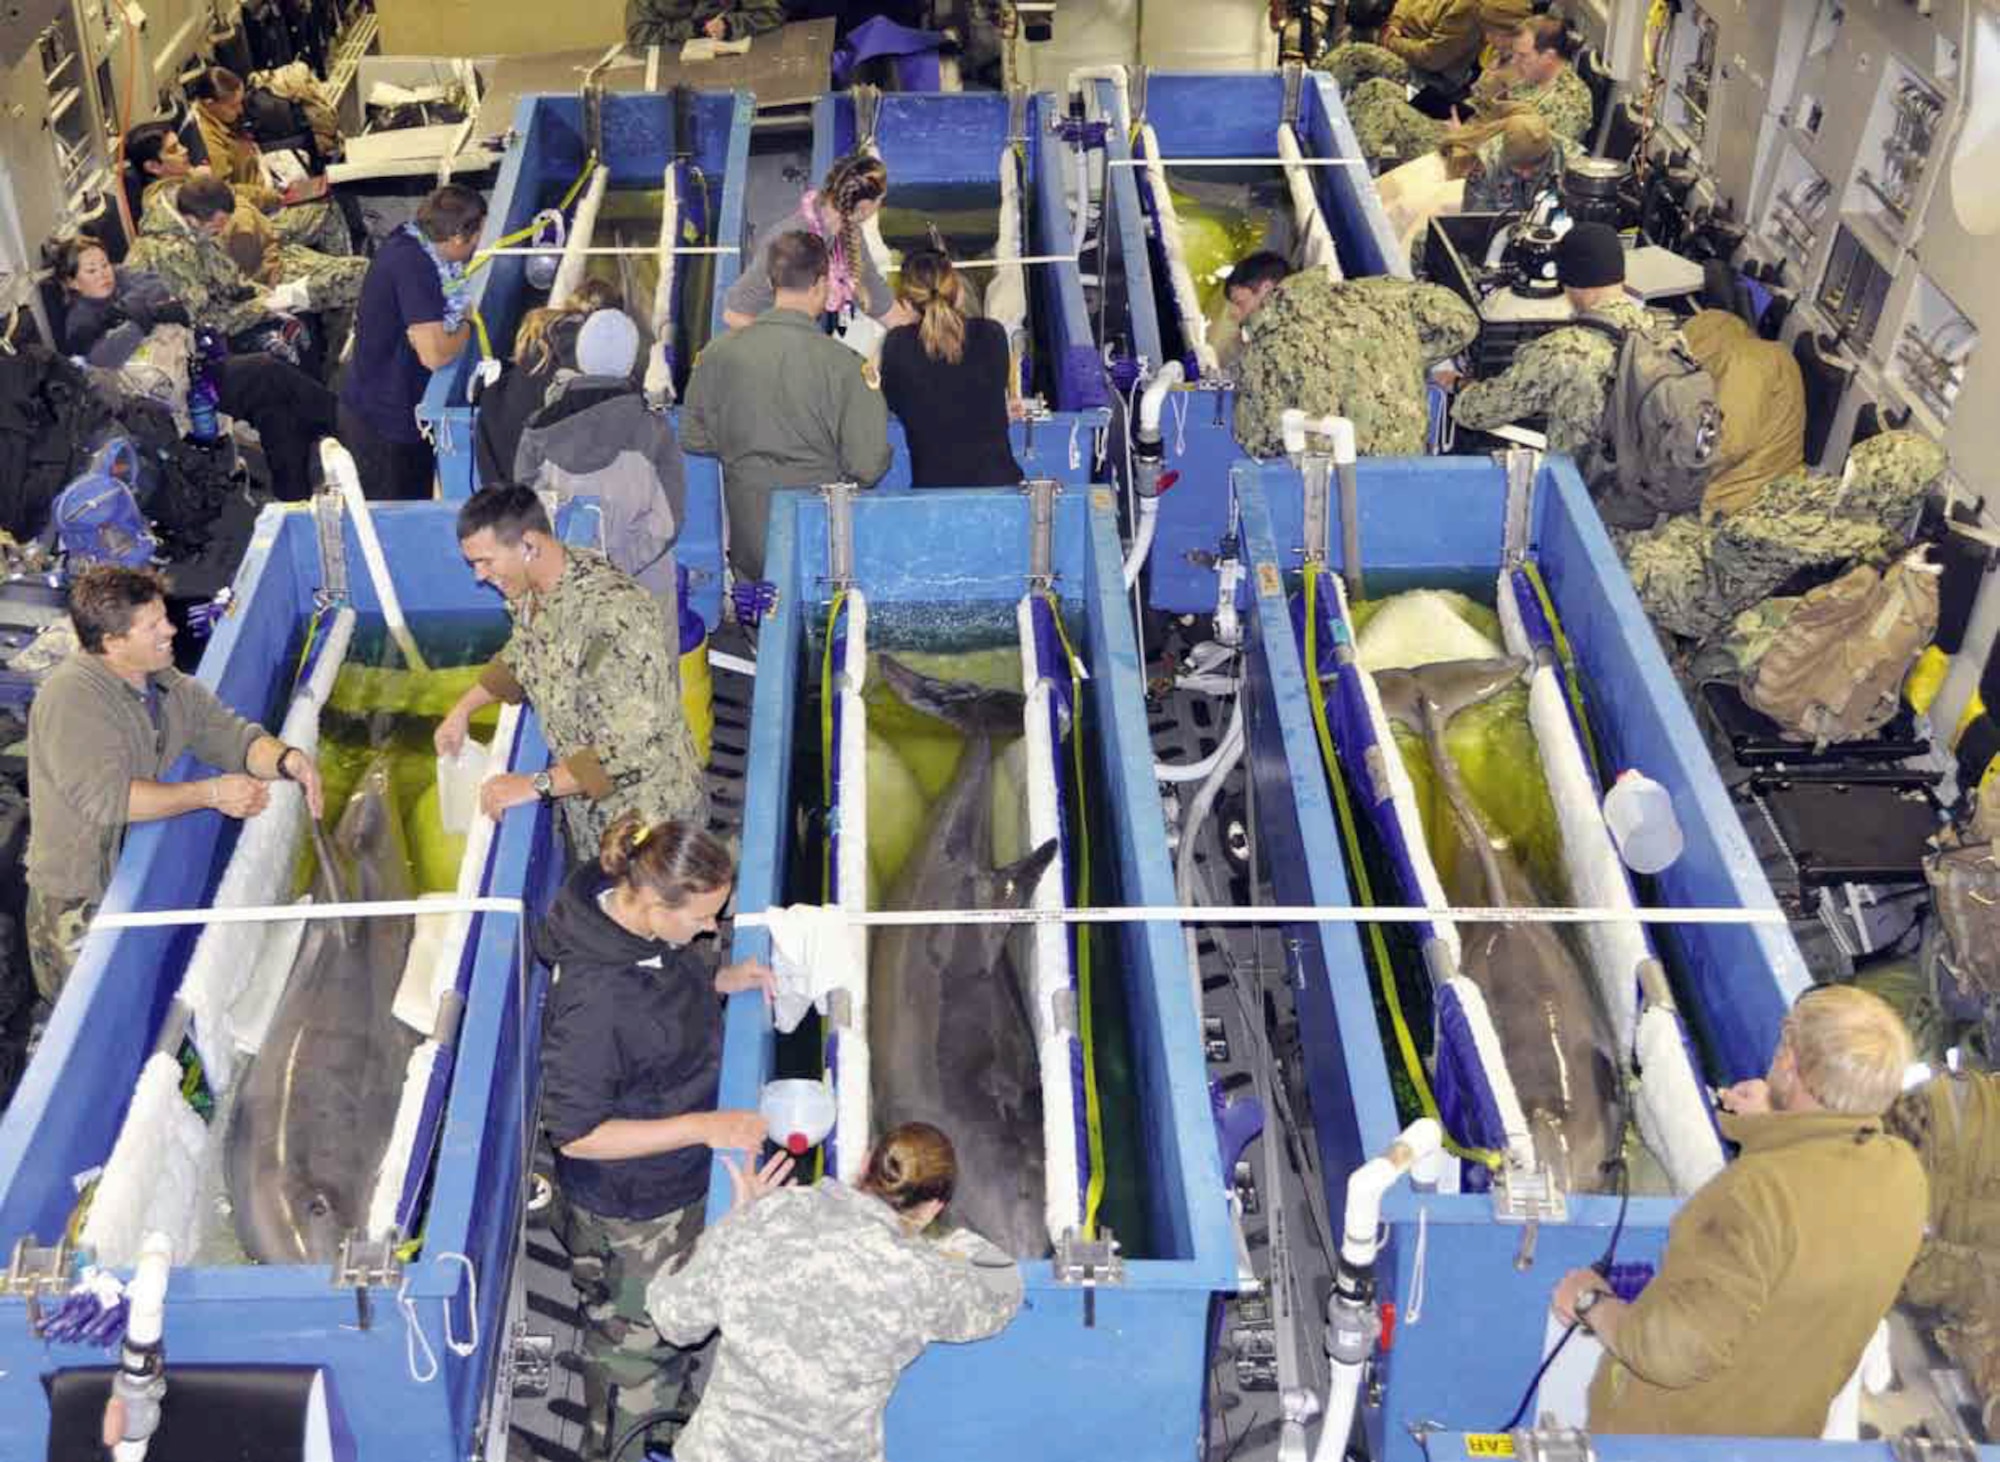 Eight Navy dolphins, from Naval Air Station North Island, Coronado, Calif., were uploaded onto a March Air Reserve Base C-17 Globemaster III and flown to Hickam Air Force Base, Hawaii, March 26, 2012. The cargo bay was full of personnel and equipment needed to support the dolphins. During the six-hour flight everything revolved around ensuring the dolphins were comfortable and taken care of. They are headed to Hawaii to help search for underwater wreckage and maintain their flyaway capabilities to prepare for real world deployments. (U.S. Air Force photo by Staff Sgt. Megan Crusher)